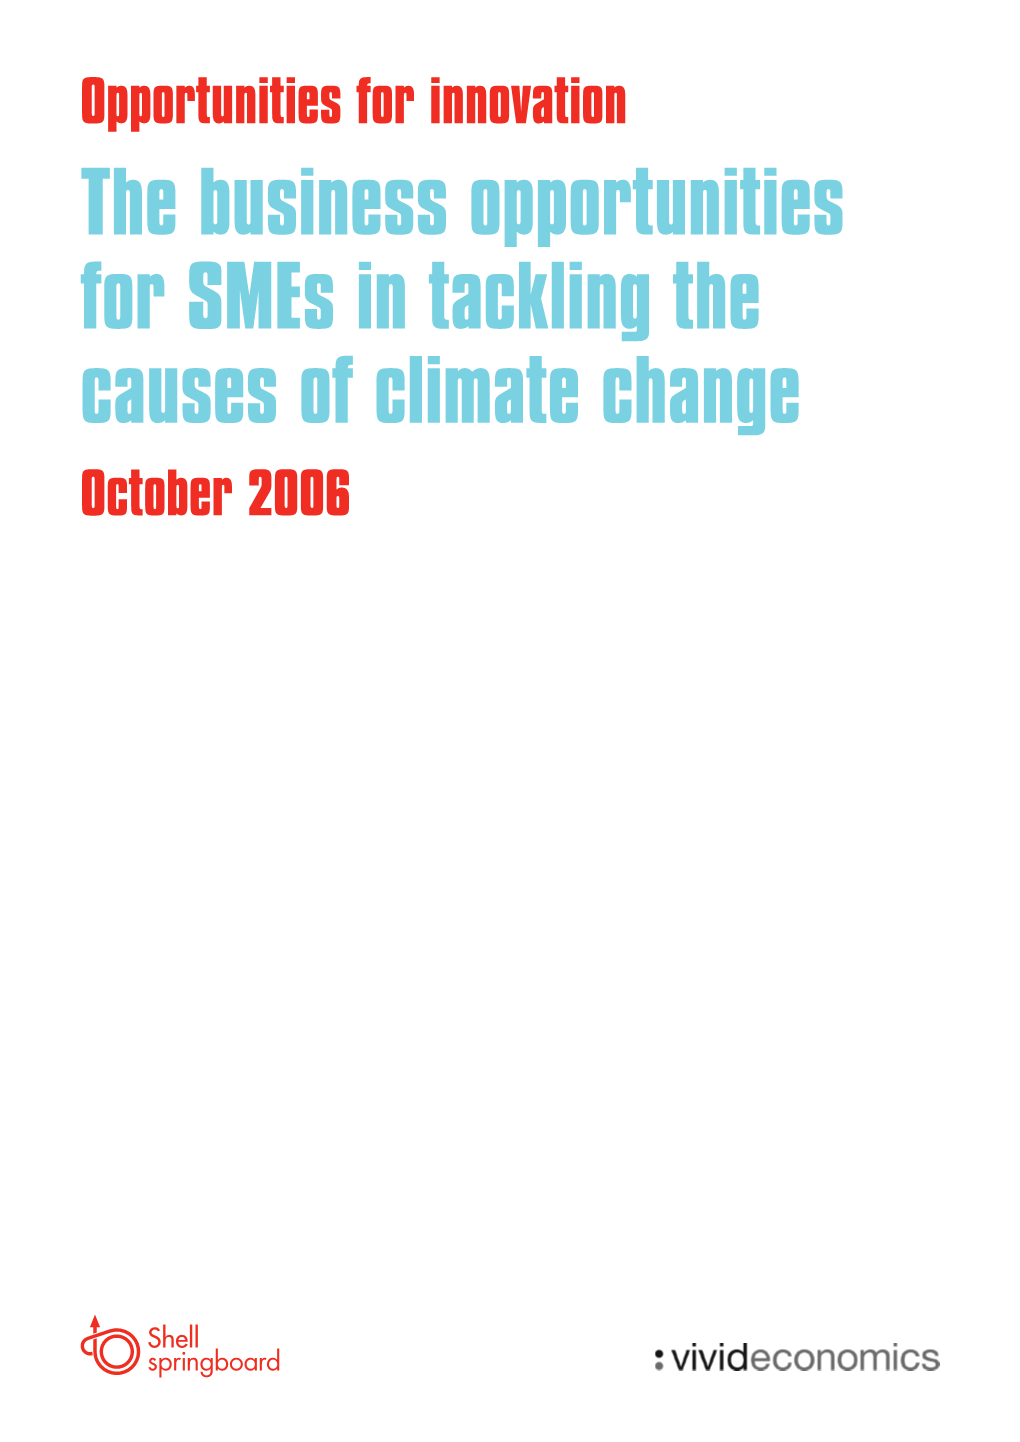 The Business Opportunities for Smes in Tackling the Causes of Climate Change October 2006 Executive Summary